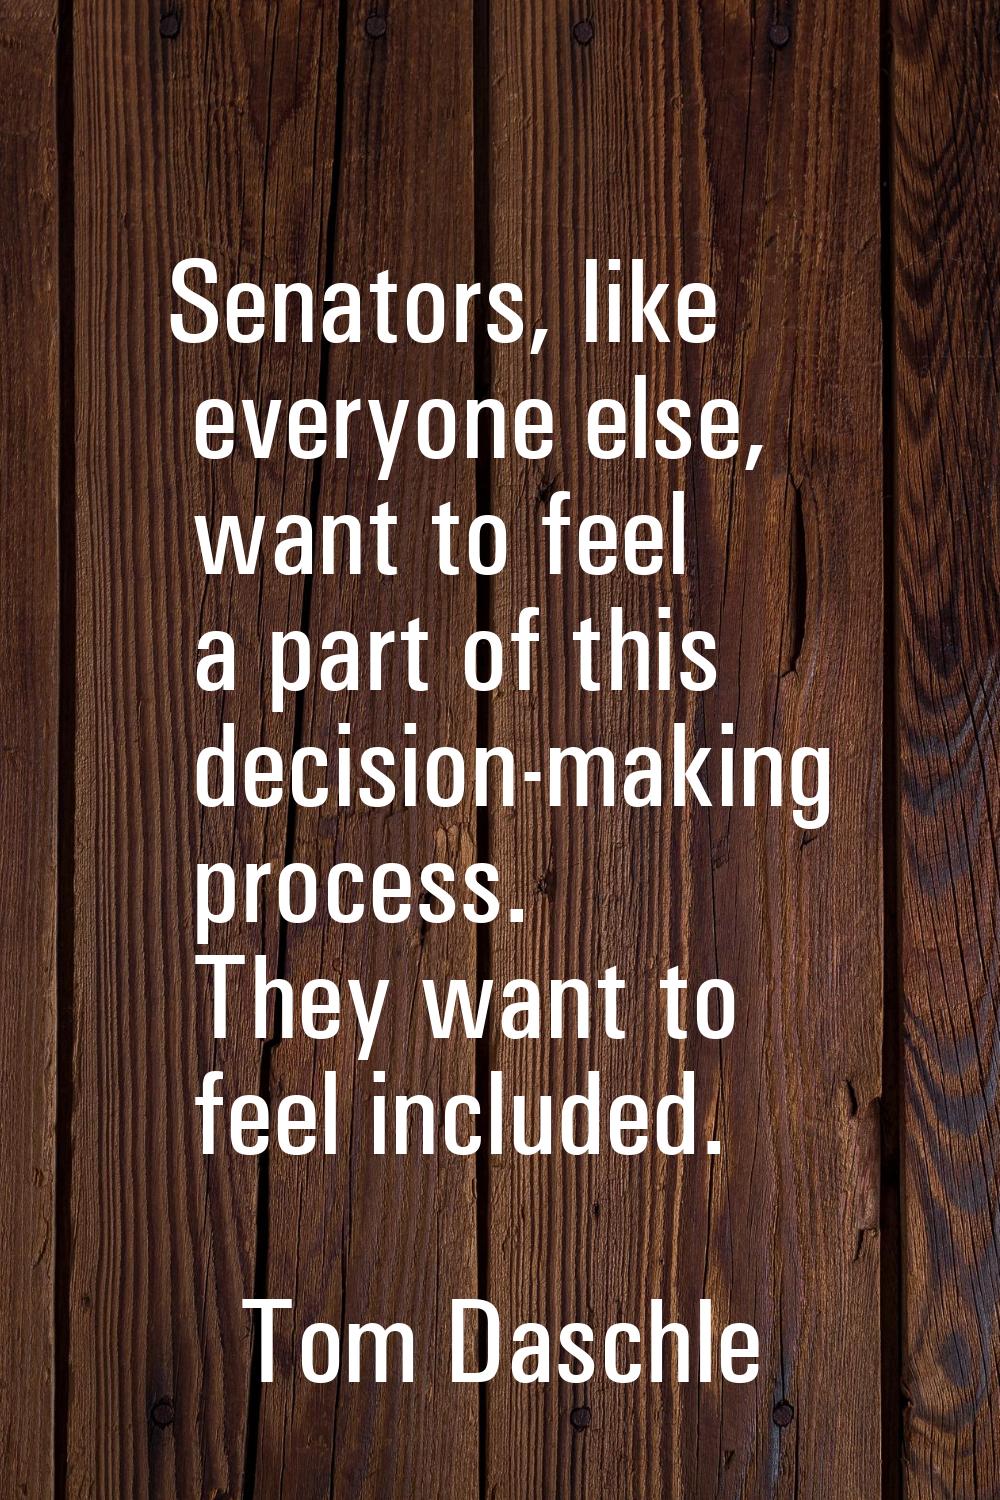 Senators, like everyone else, want to feel a part of this decision-making process. They want to fee